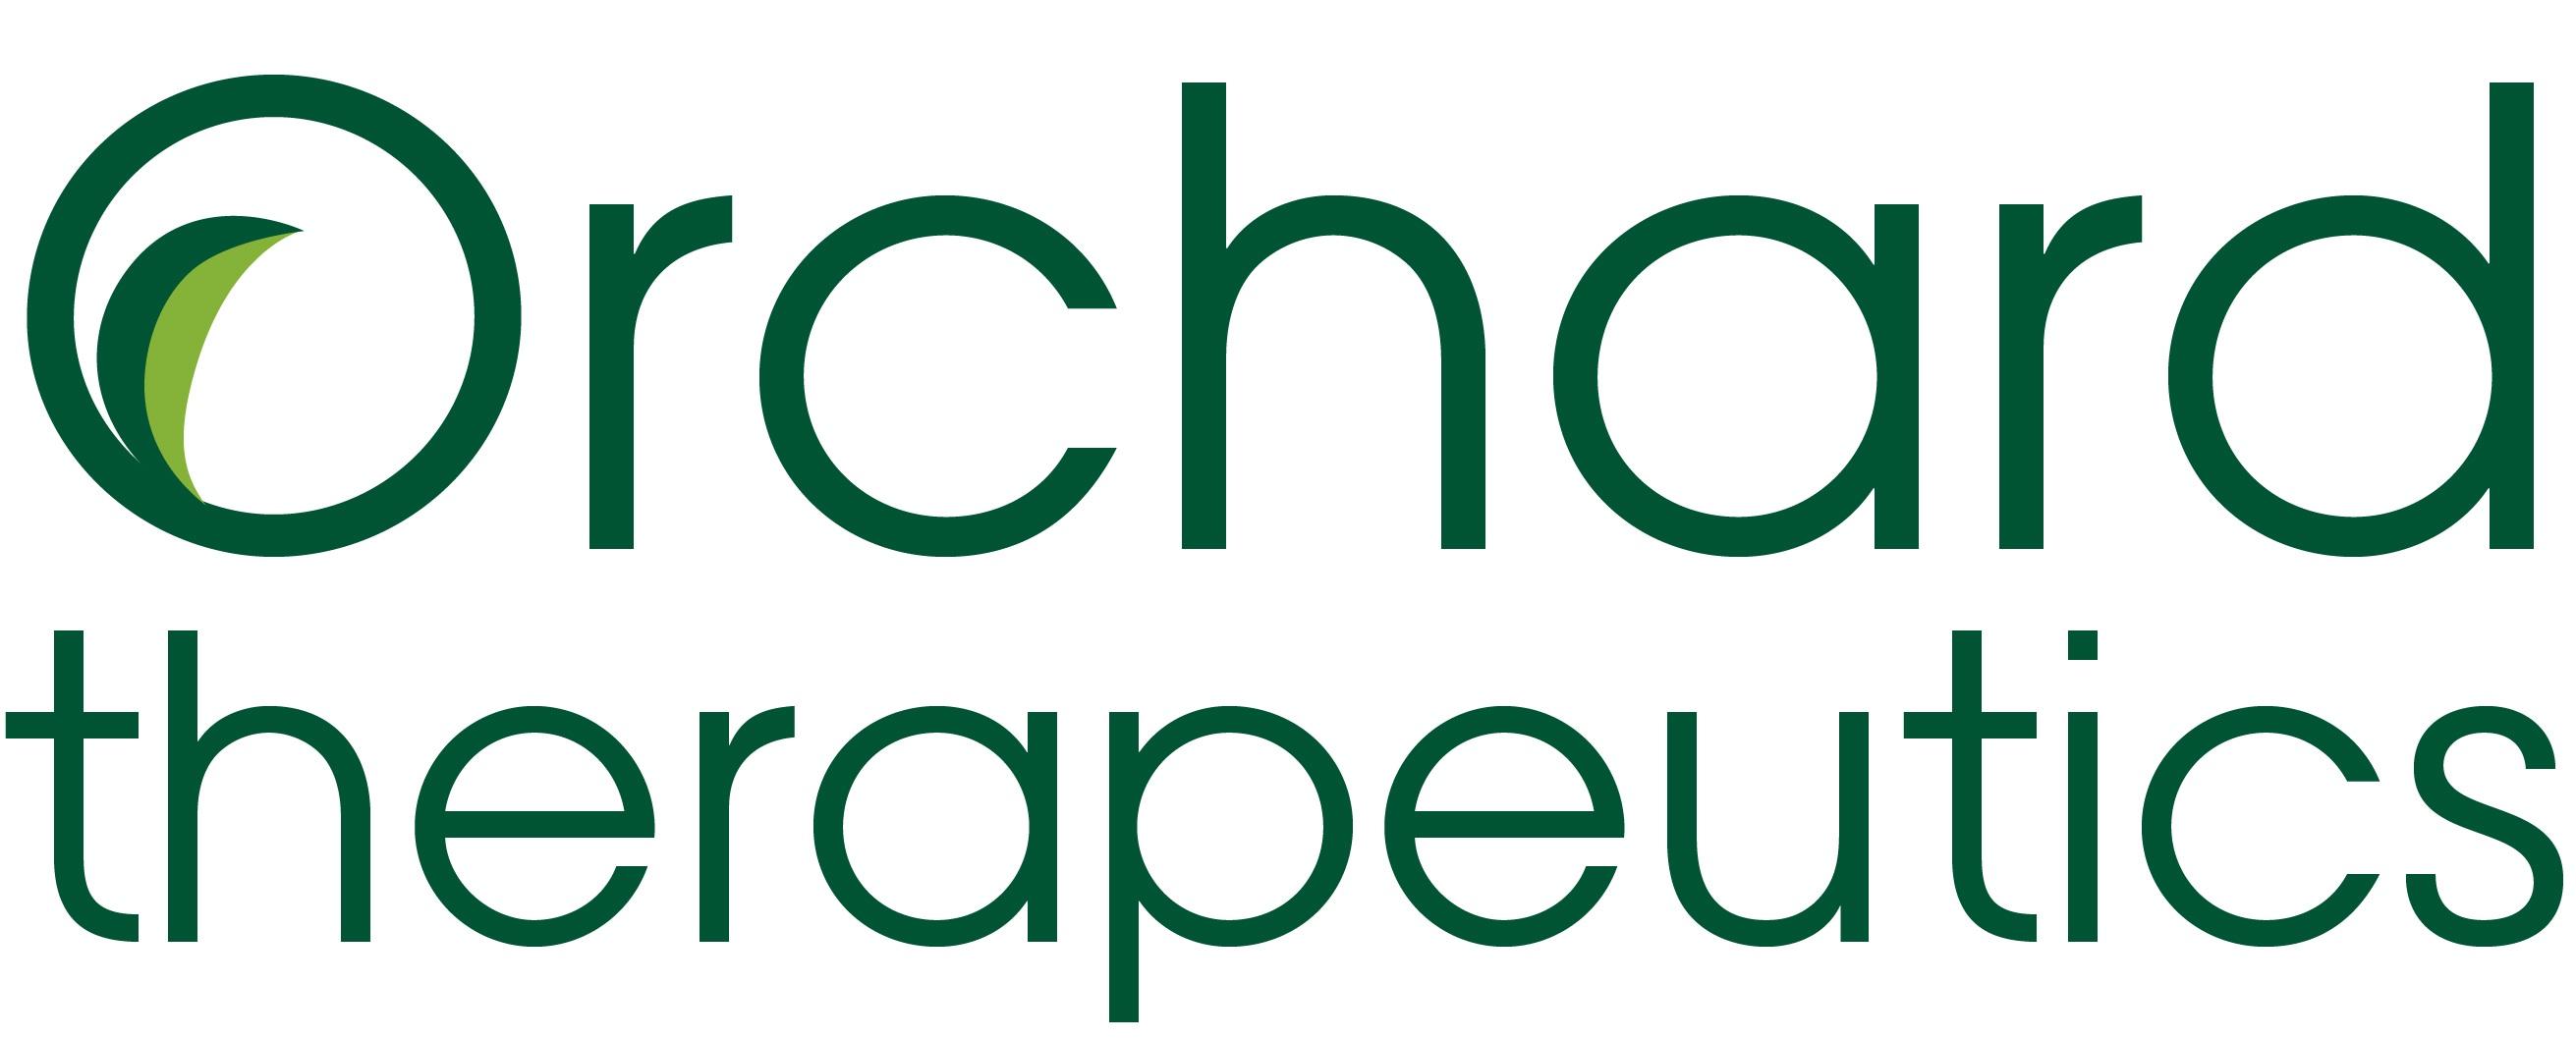 Orchard Logo - Orchard Therapeutics Announces $110M Series B Financing to Advance ...